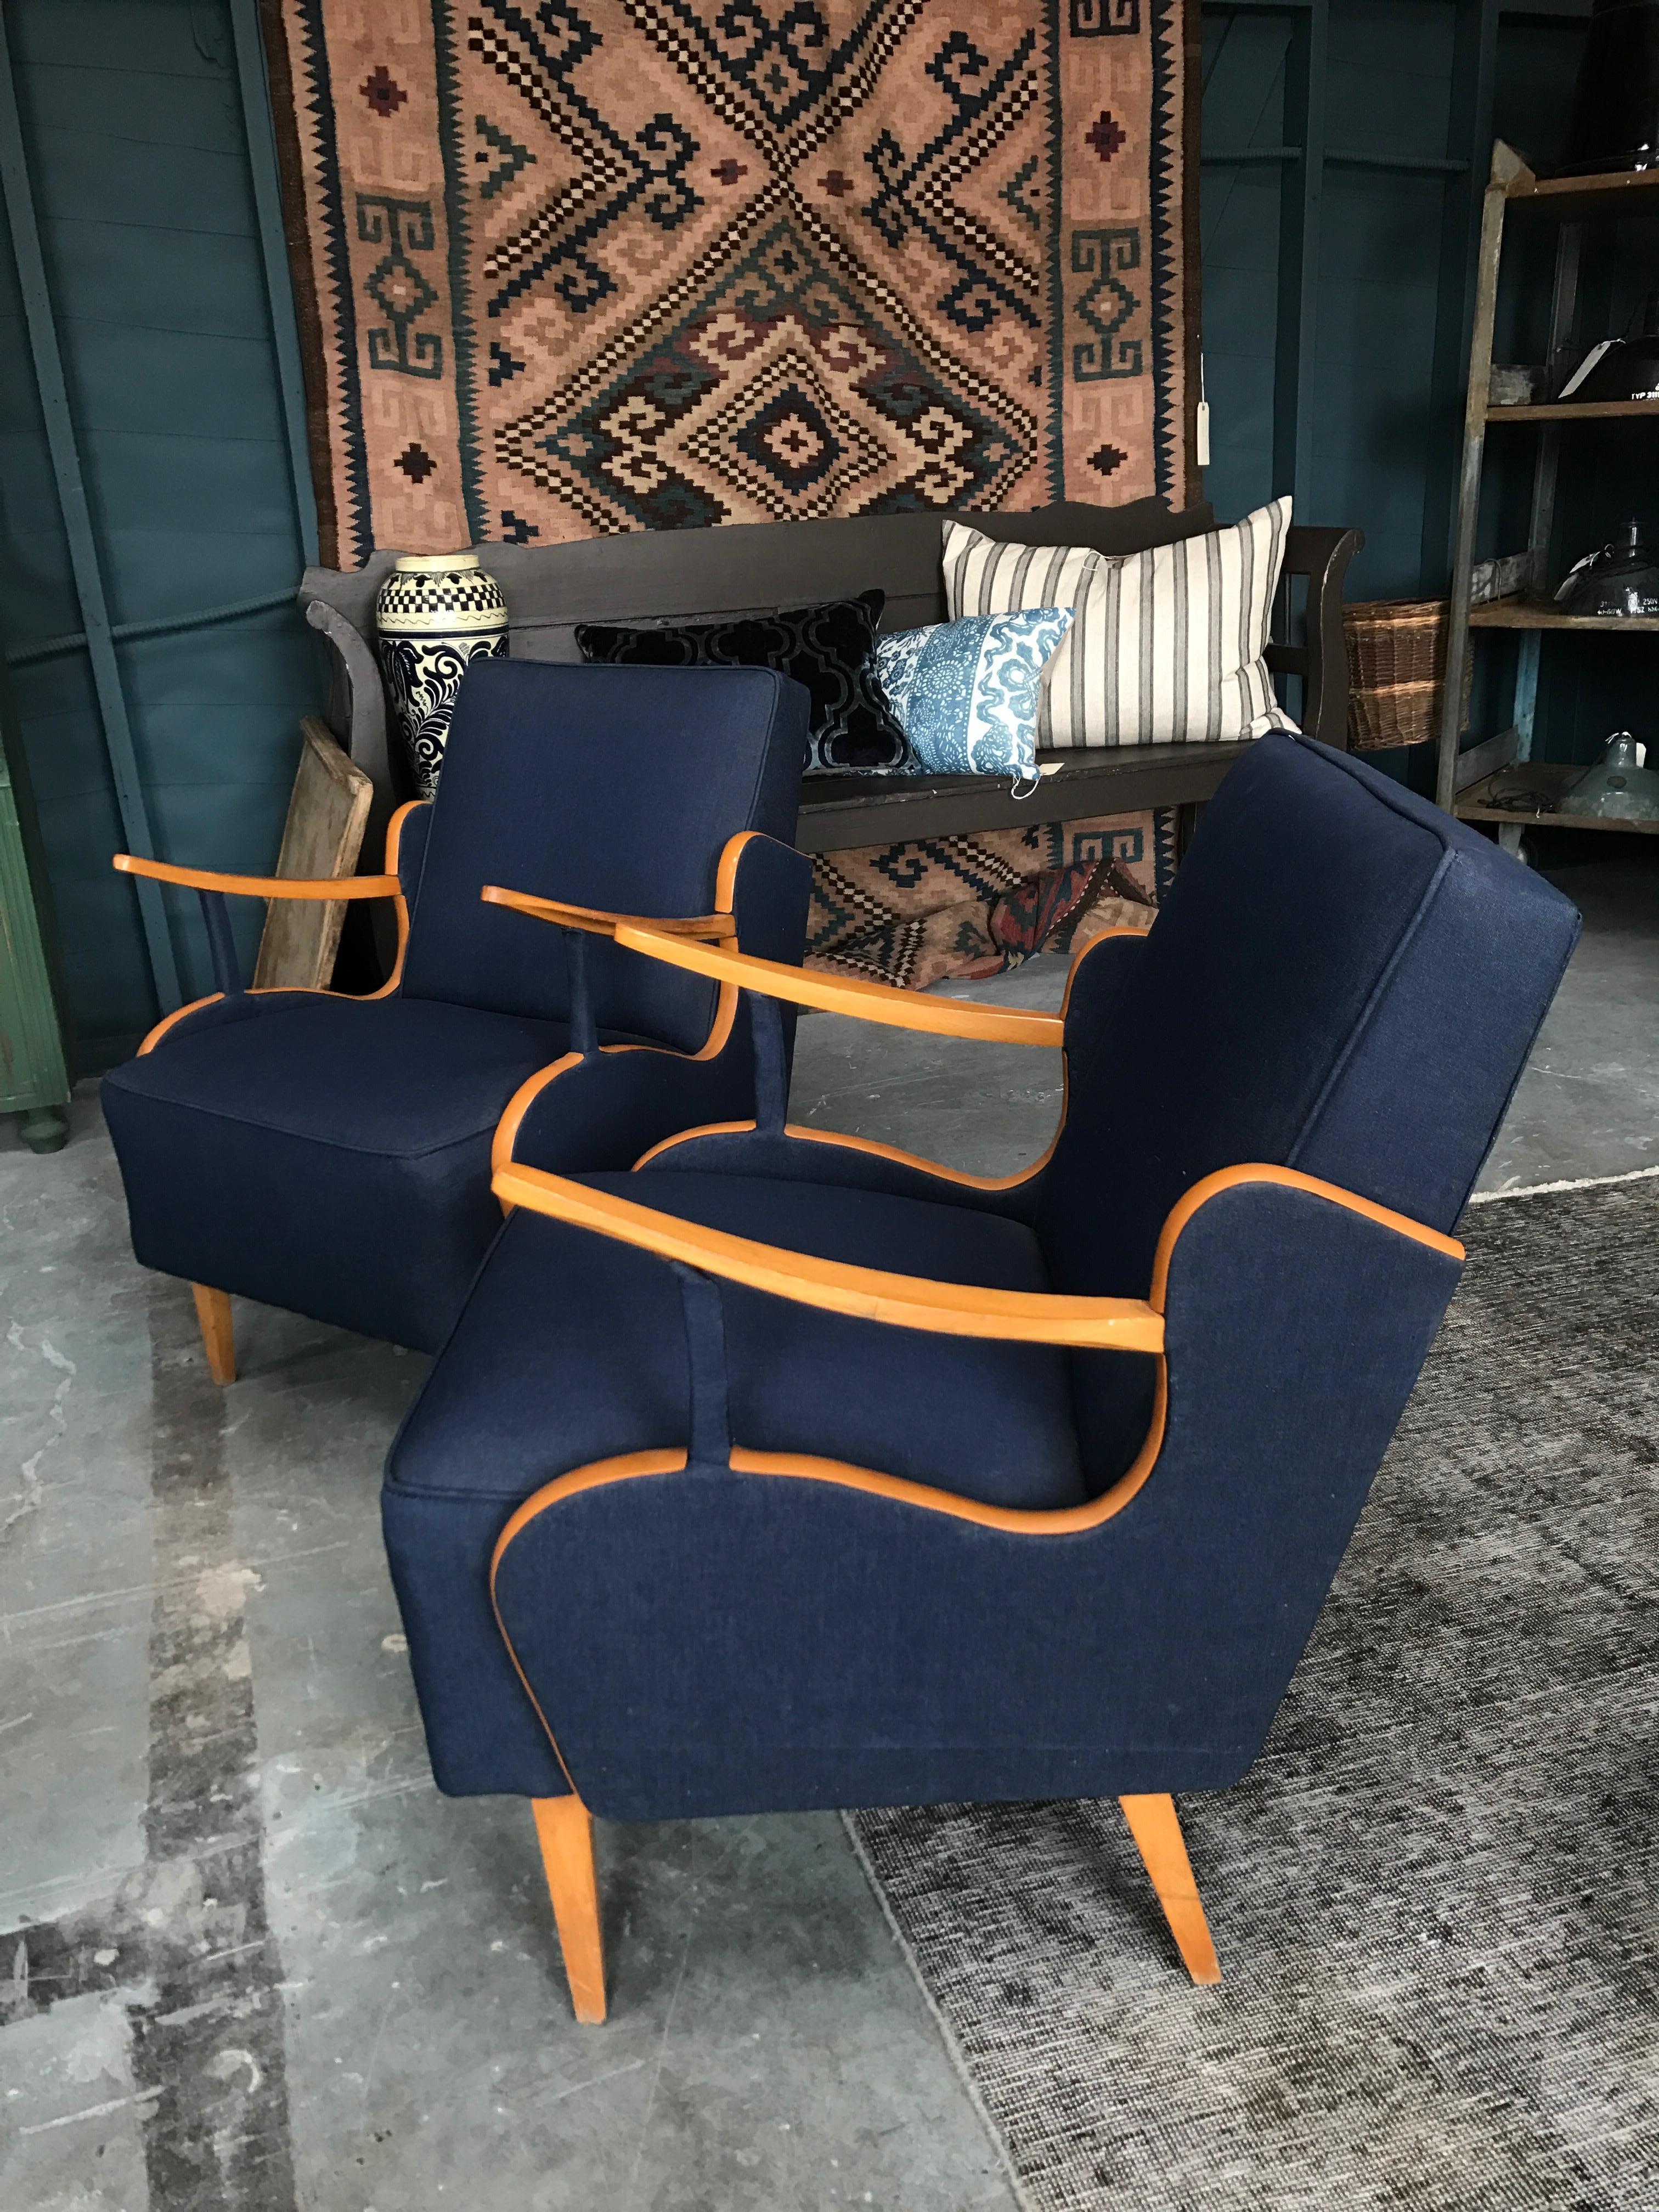 Pair of reupholstered vintage European chairs. Featuring blue fabric and a light stained wood. 

Measures: 24 W x 24 D x 31 H seat 17 H x 18 D.